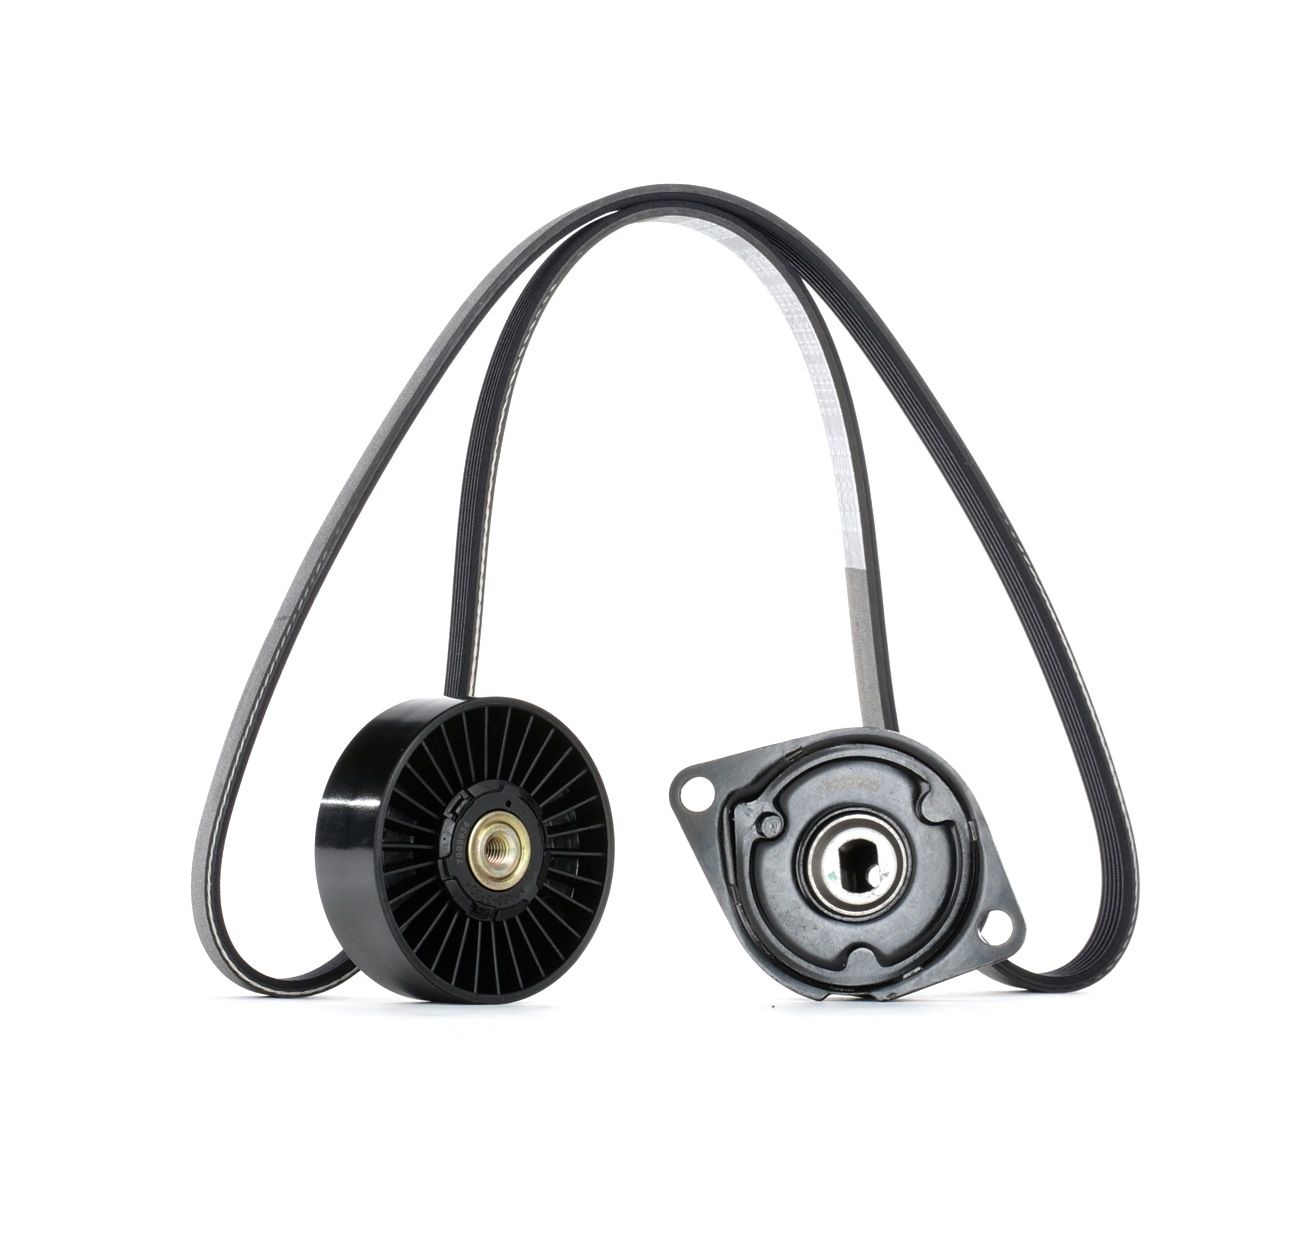 STARK Check alternator freewheel clutch & replace if necessary Length: 1043mm, Number of ribs: 6 Serpentine belt kit SKRBS-1200336 buy